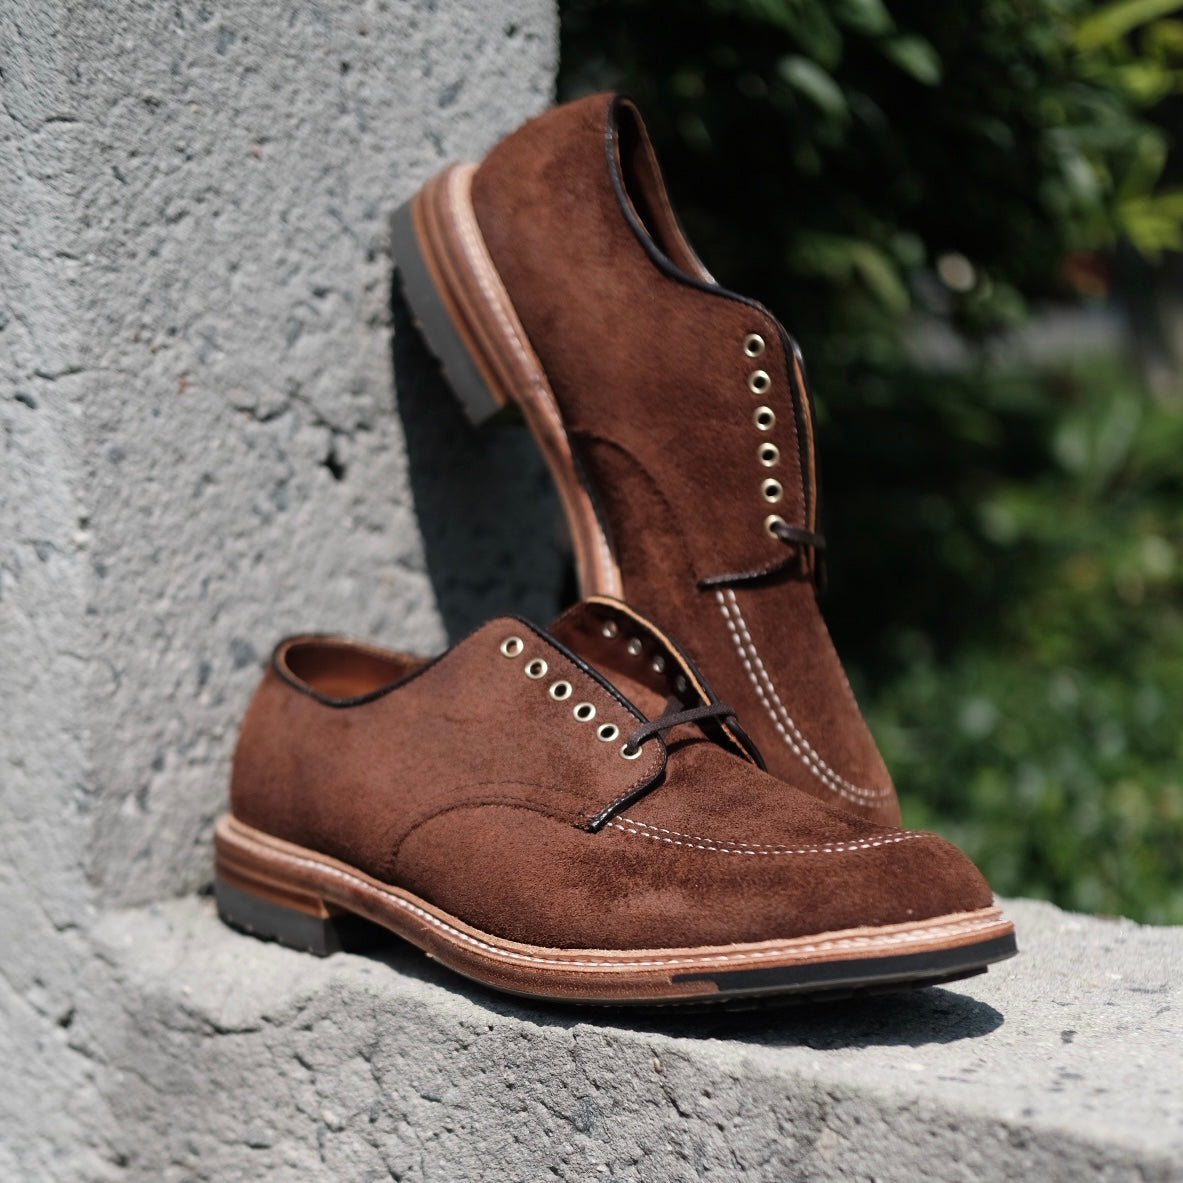 D2604C - Indy Shoe in Tobacco Reverse Chamois